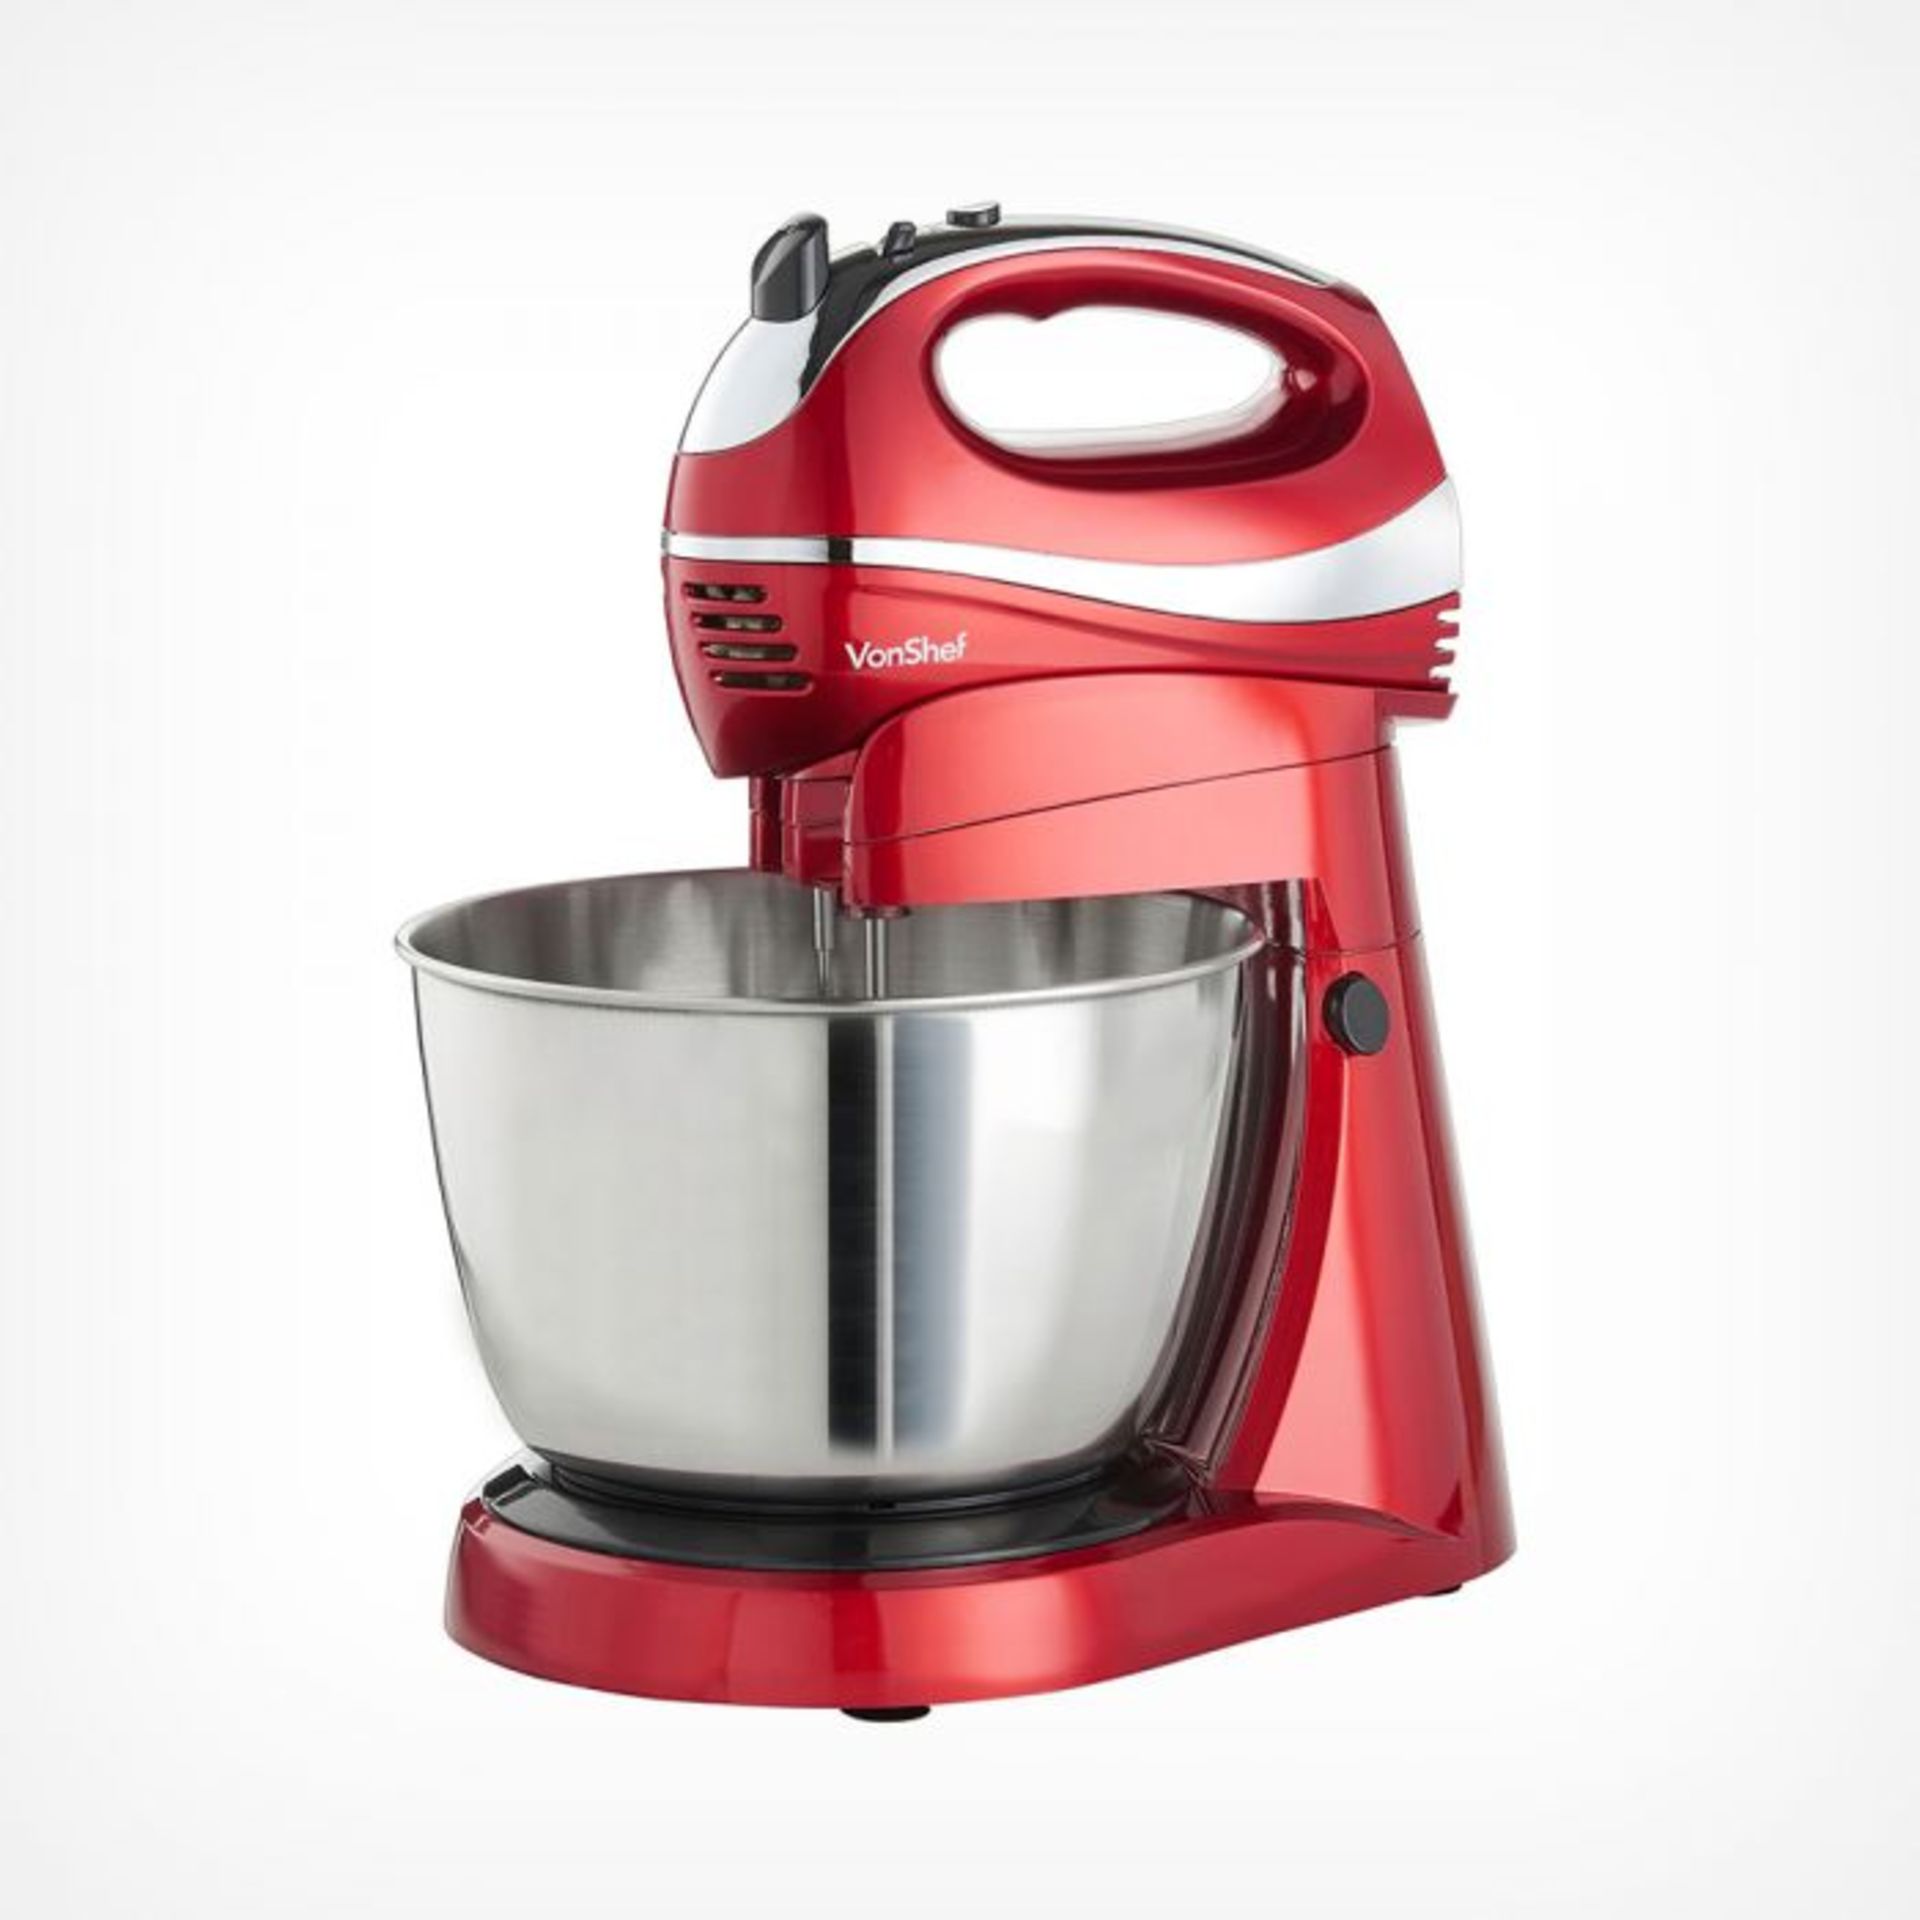 (V187) Red Hand & Stand Mixer The Red stand mixer and hand mixer is a must have kitchen applia... - Image 2 of 3